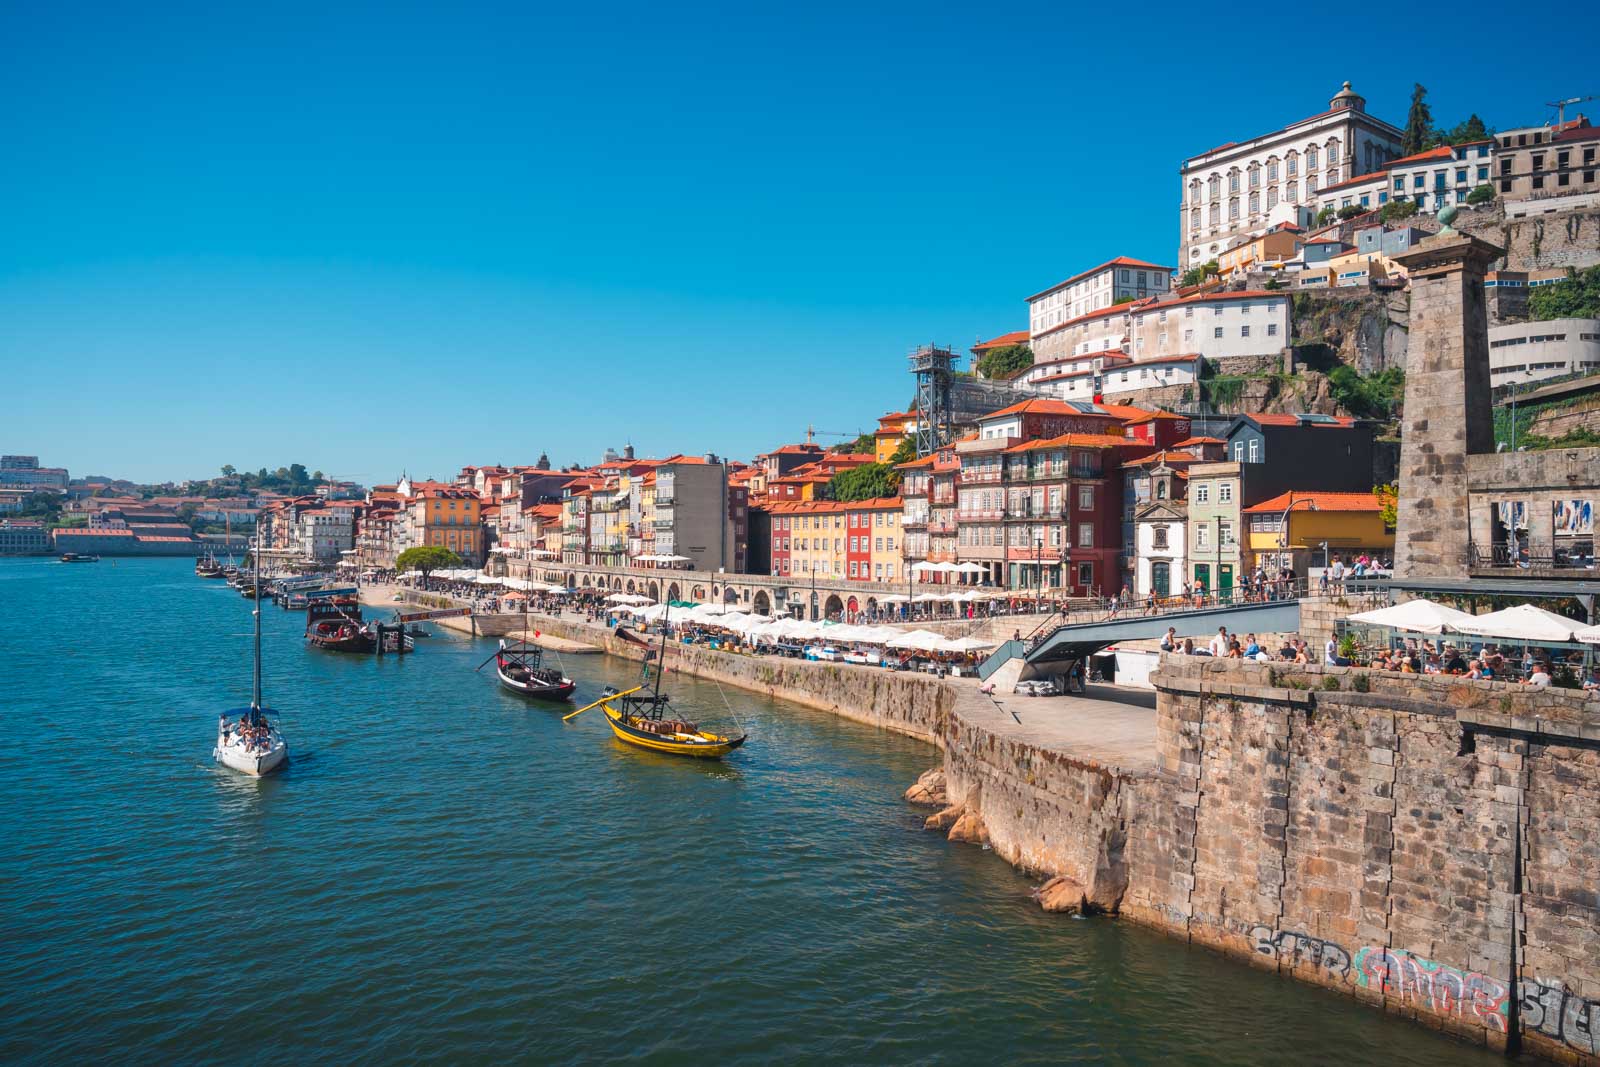 Porto, one of the major cities in Northern Portugal